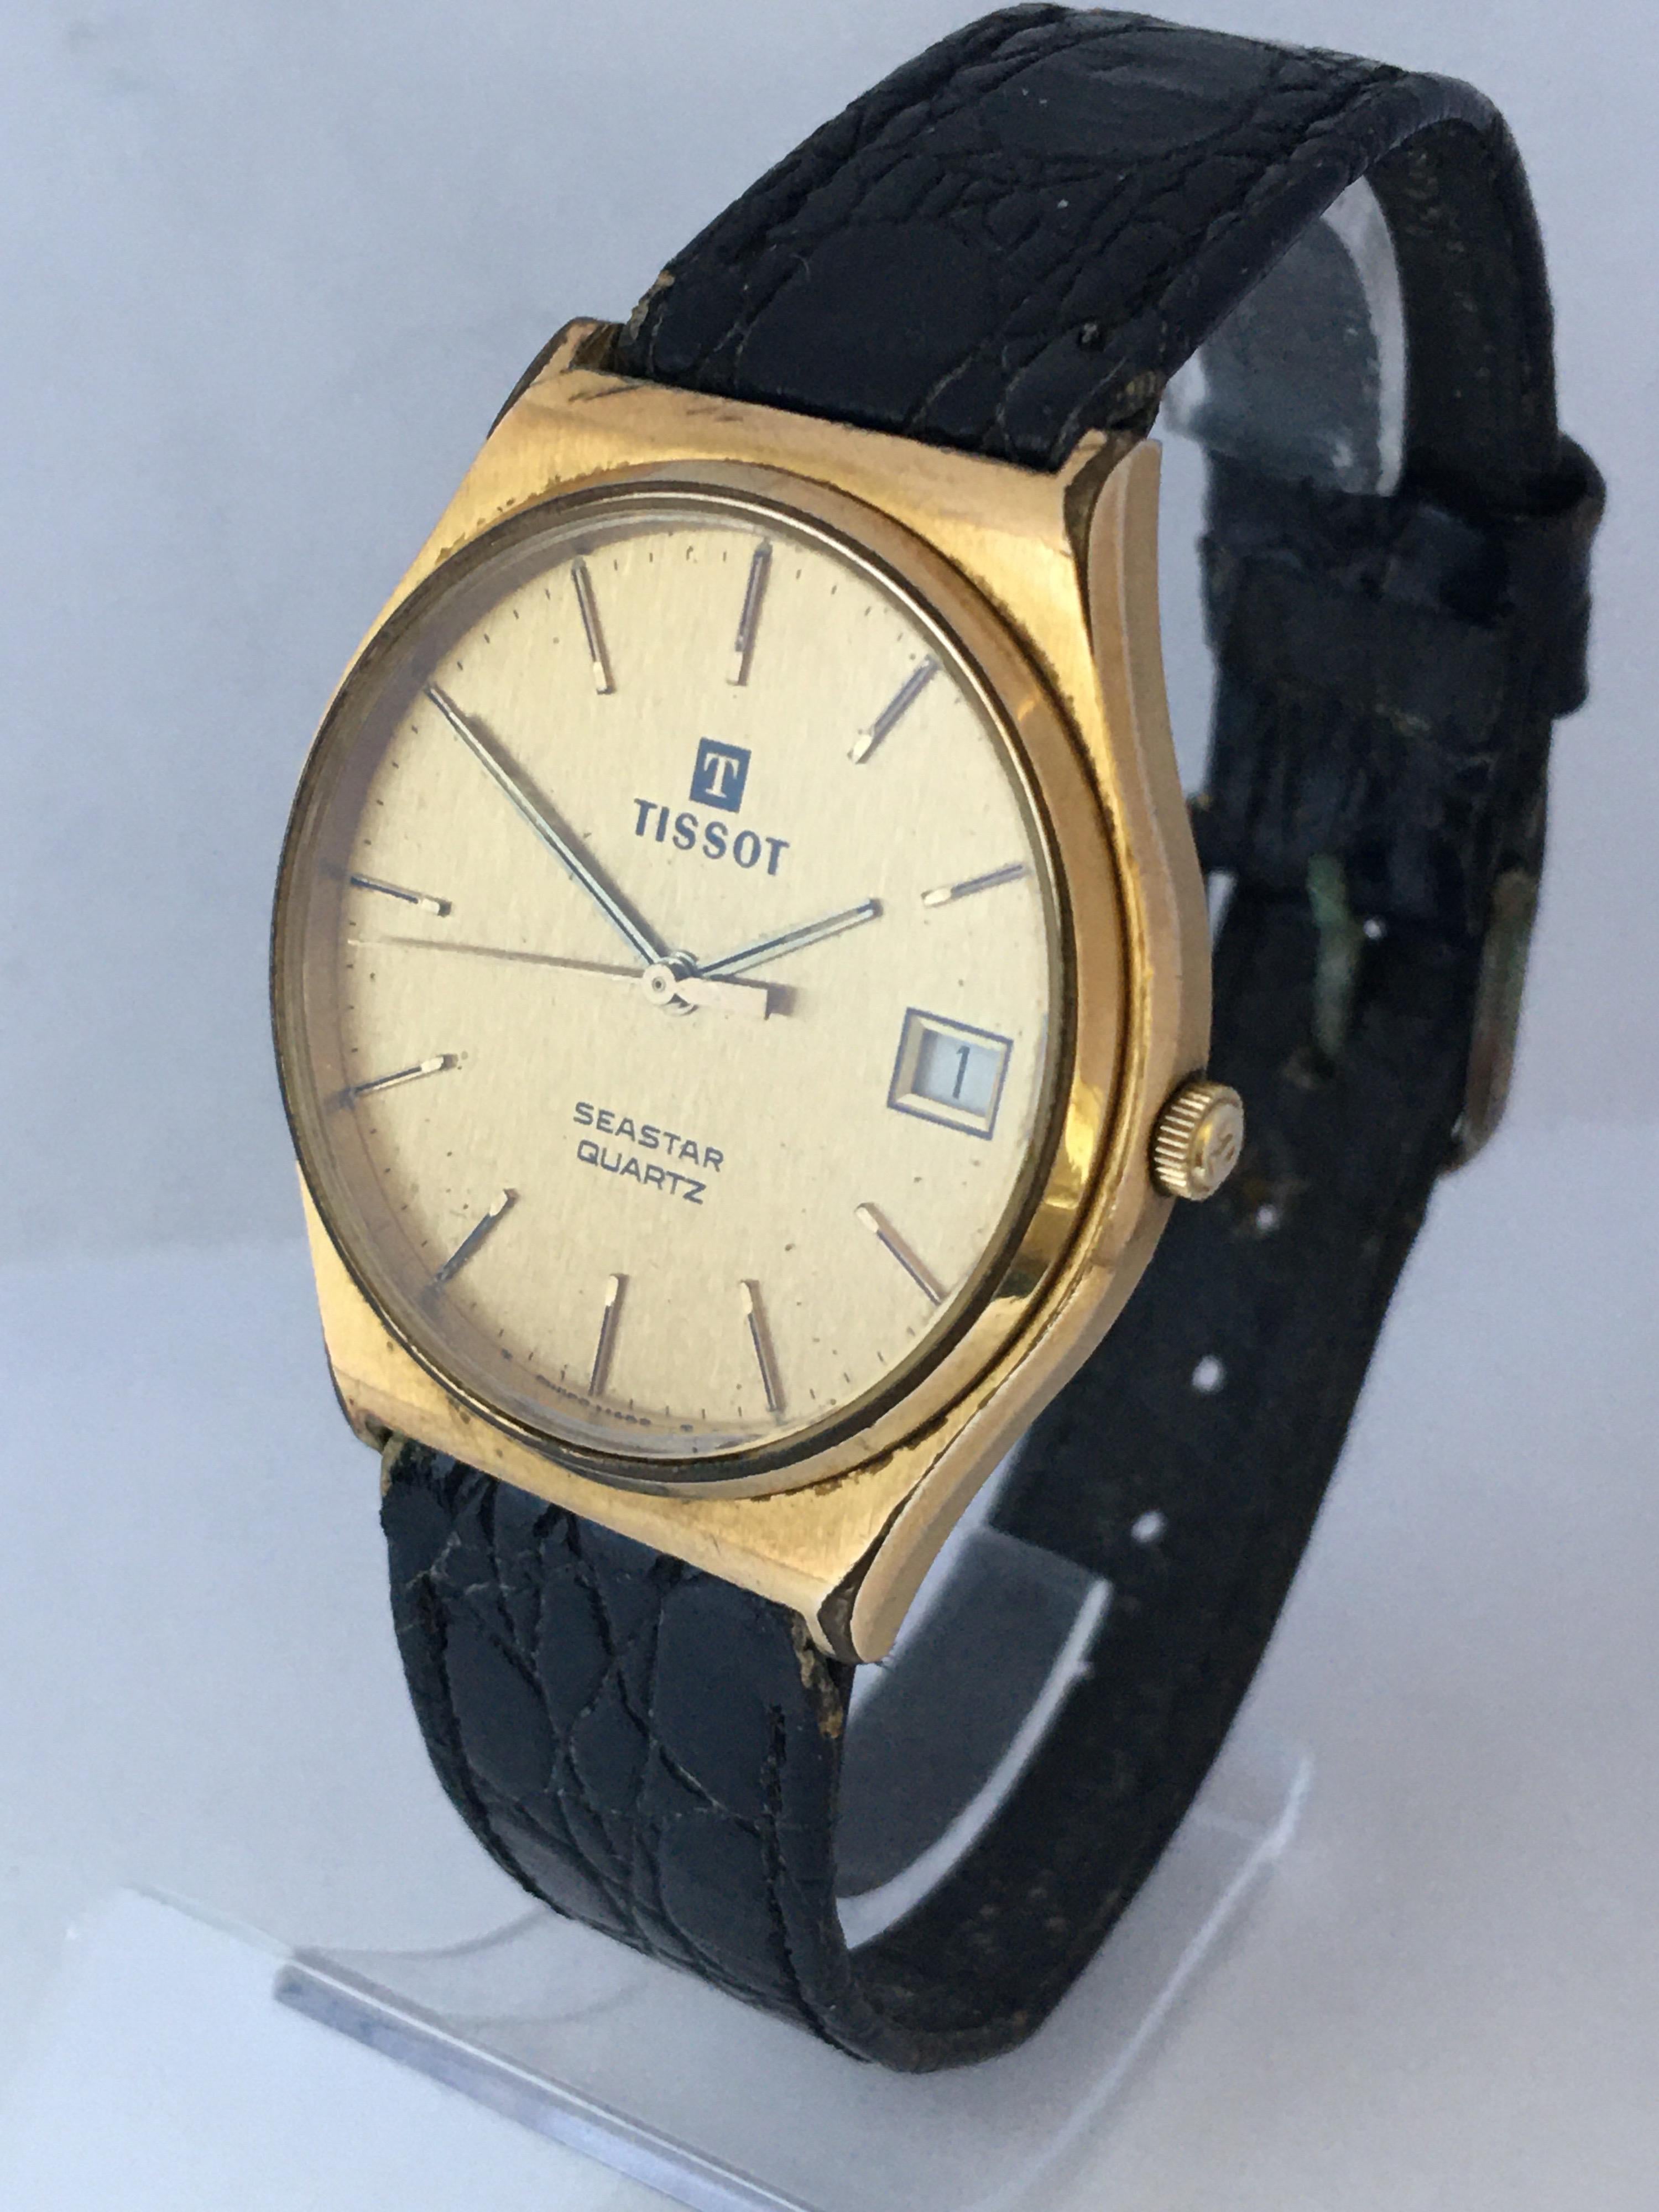 This beautiful pre-owned battery operated Watch is working and it is running well. Visible scratches and tarnished on the watch case as shown. The strap is worn but wearable with its tarnished buckle. 

Please study the images carefully as form part